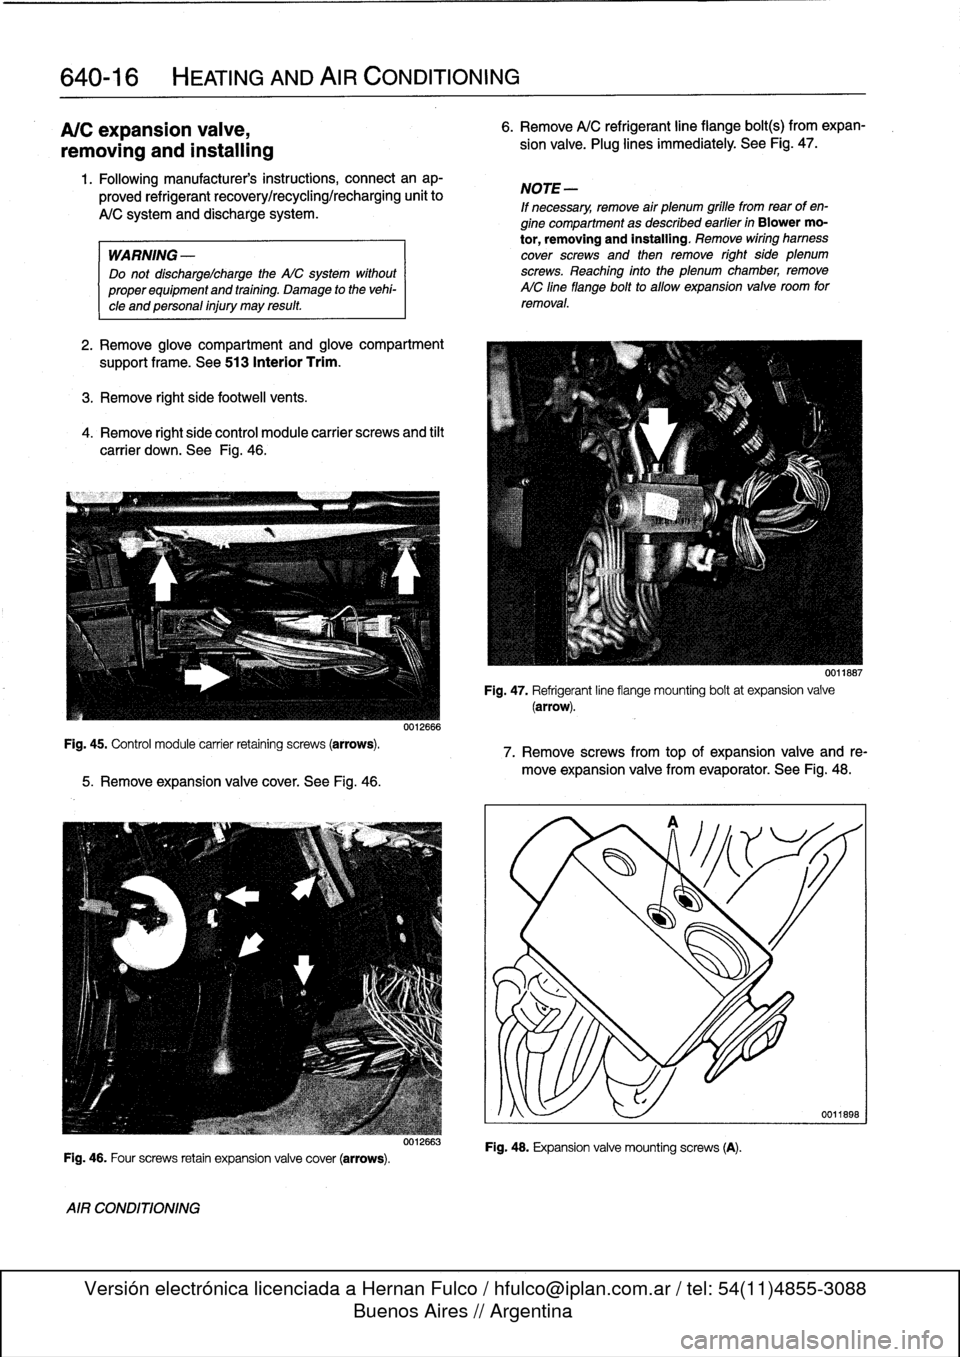 BMW 318i 1997 E36 Owners Manual 
640-16

	

HEATING
AND
AIR
CONDITIONING

A/C
expansion
valve,

removing
and
installing

Fig
.
45
.
Control
module
carrier
retaining
screws
(arrows)
.

1
.
Following
manufacturers
instructions,
connec